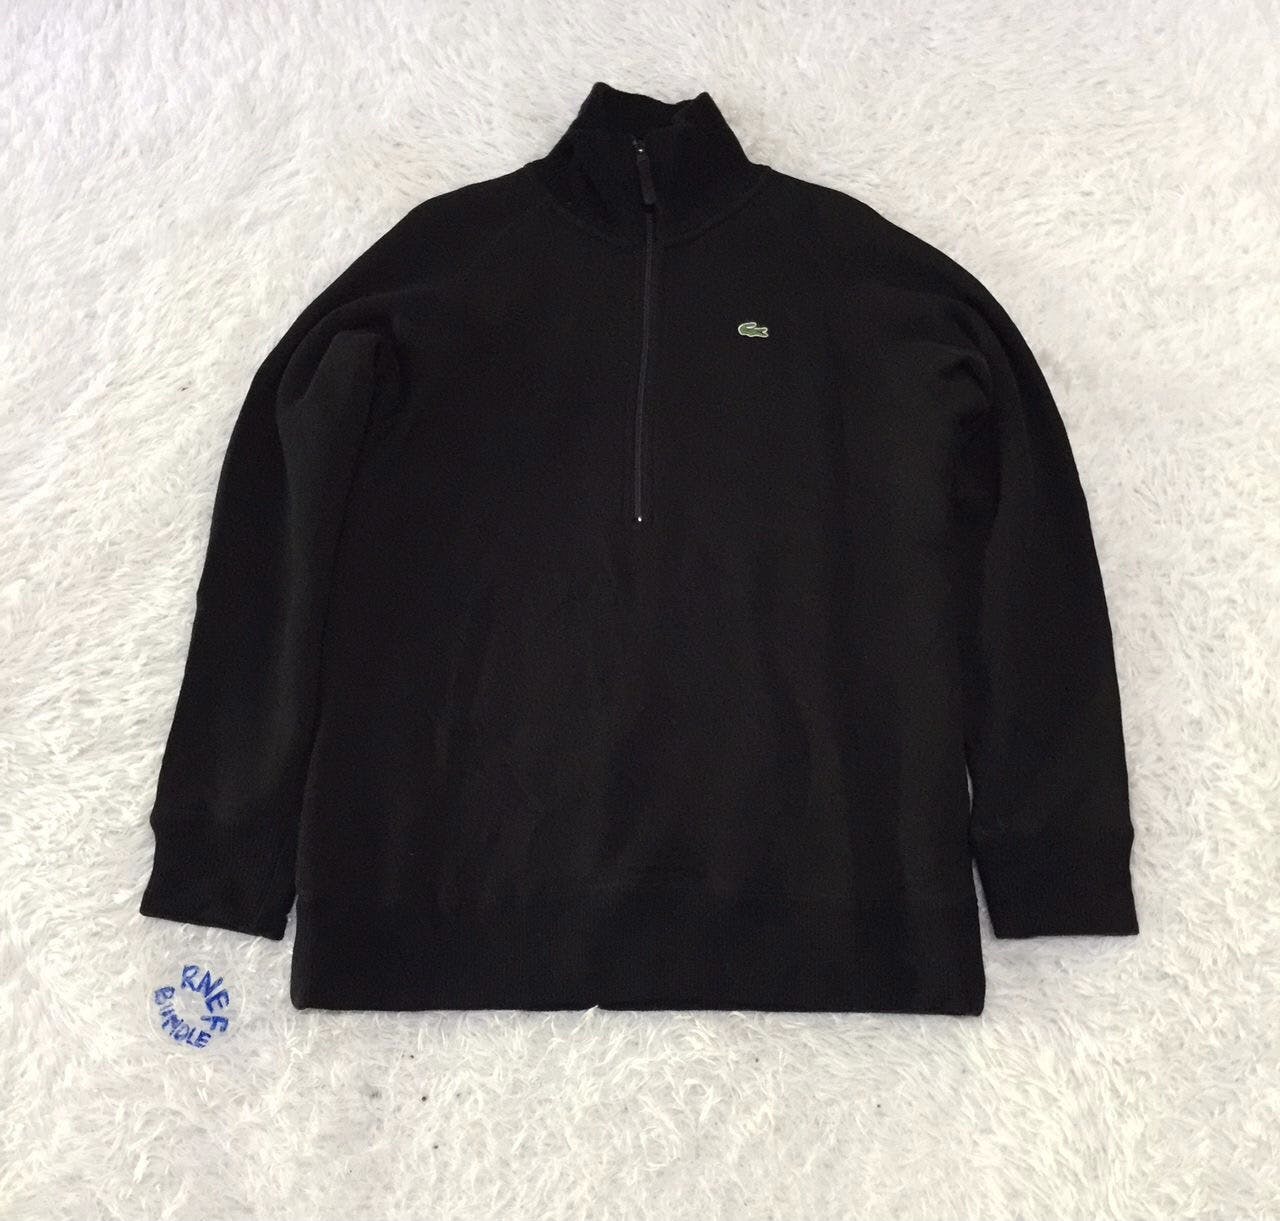 Lacoste sweater jacket made in Japan - 1